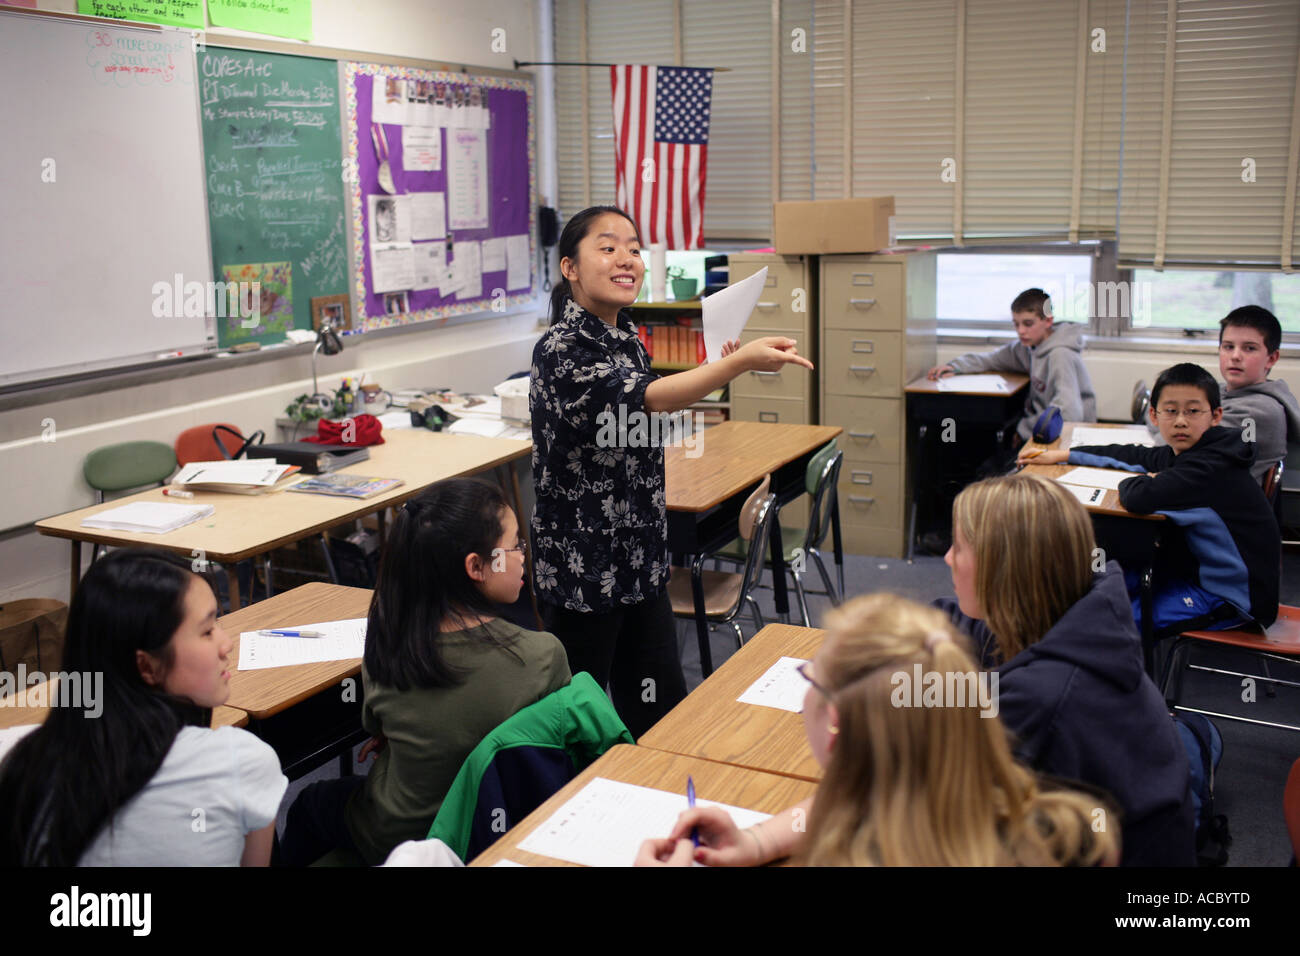 Kinder lernen Mandarin-Chinesisch in a Connecticut Middle School USA Stockfoto